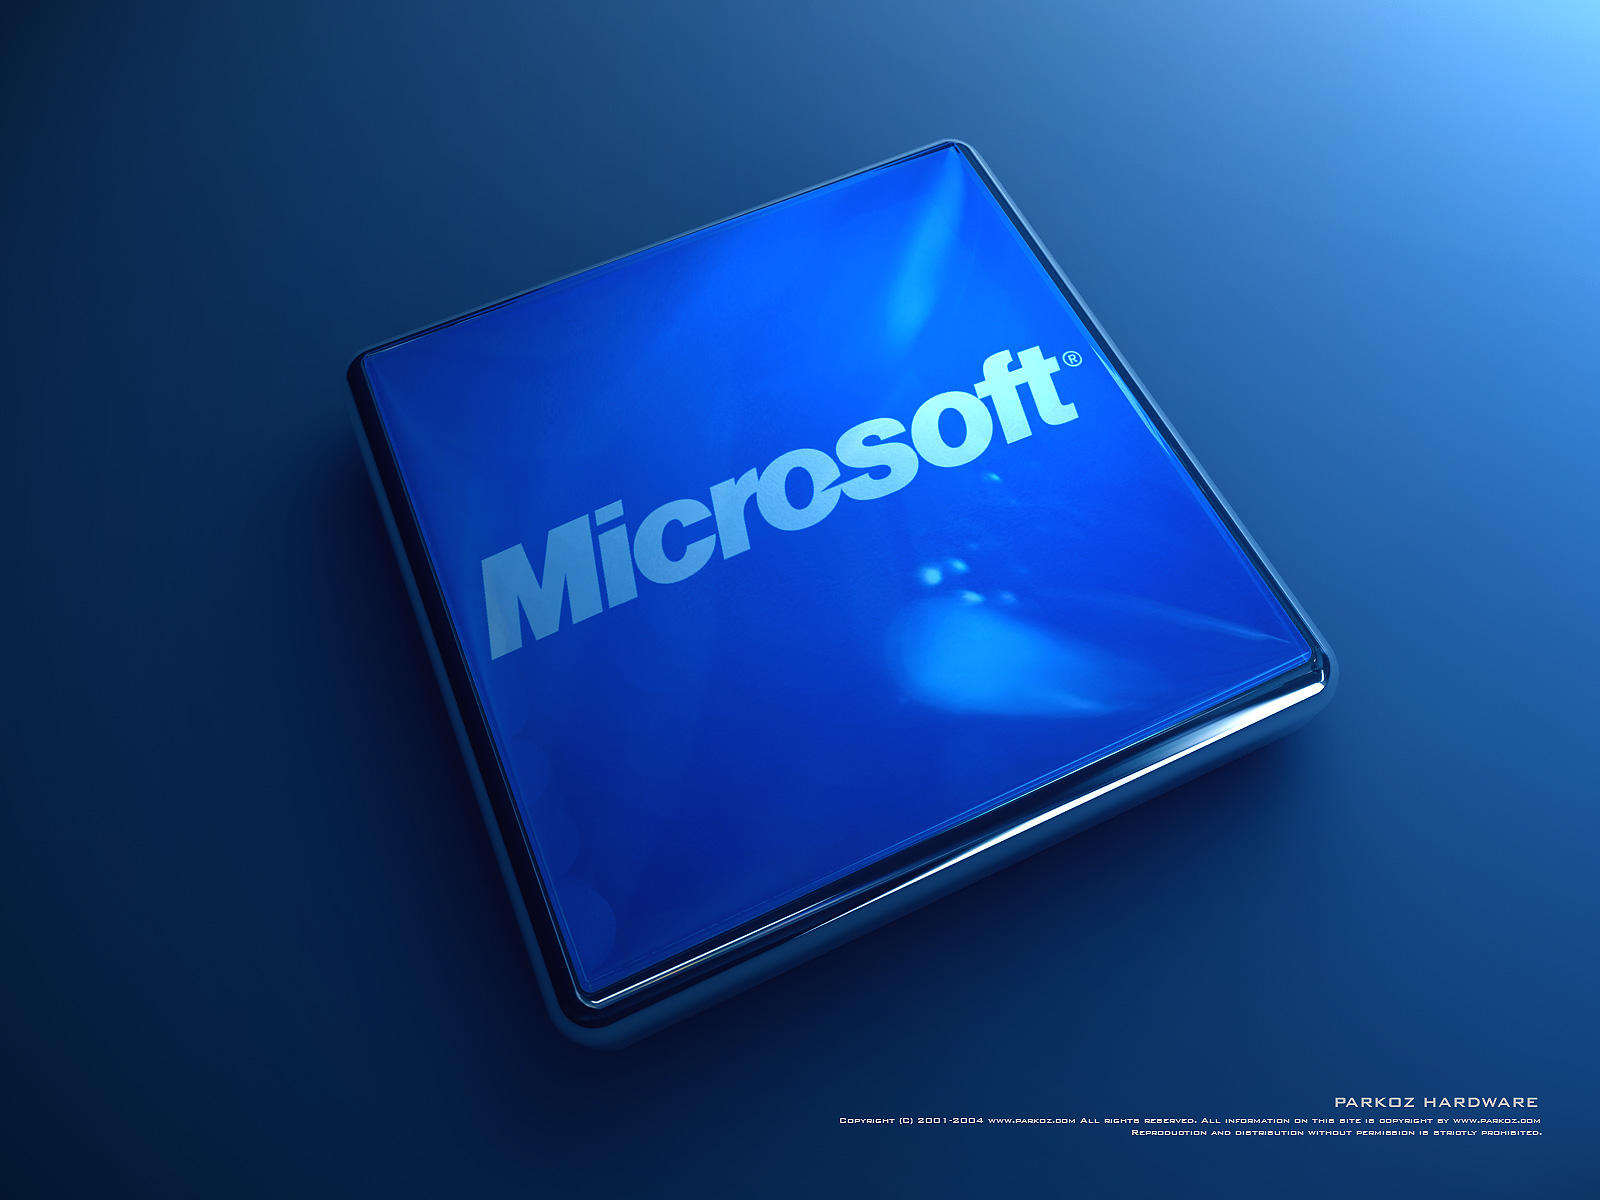  free microsoft windows wallpapers and backgrounds 1024x768 pixelhtml